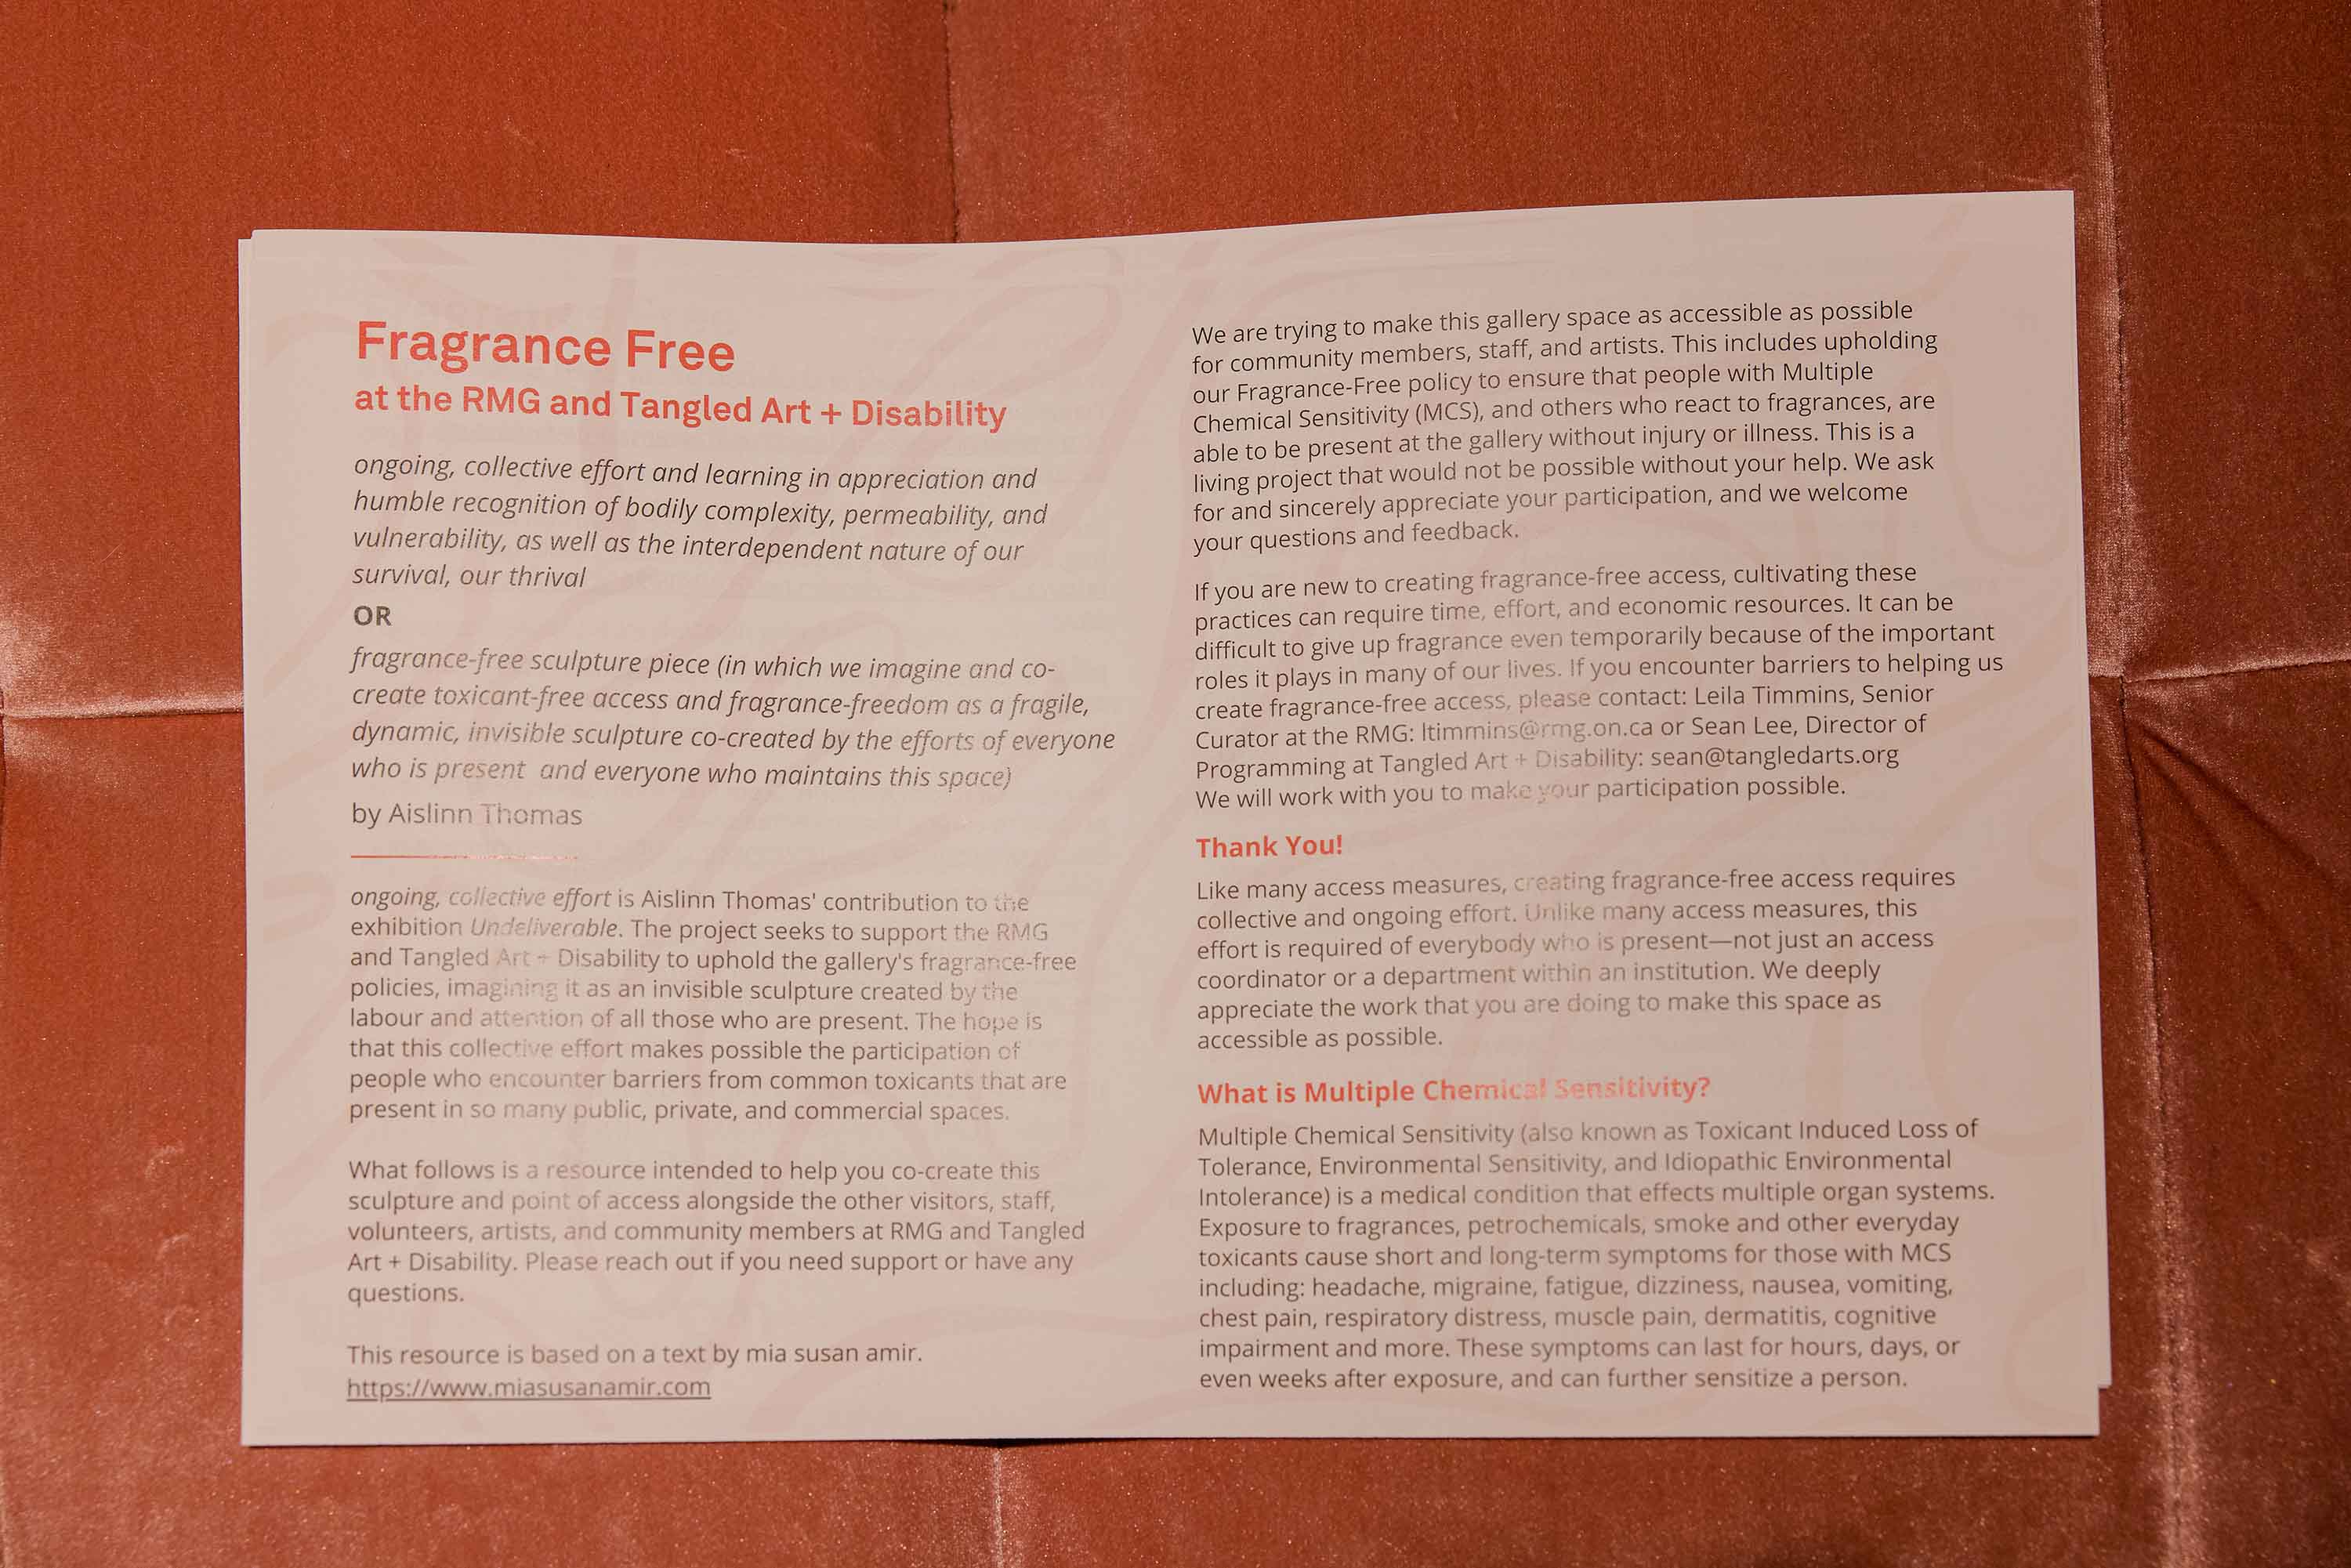 An informational poster titled “Fragrance Free at the RMG and Tangled Art + Disability”.